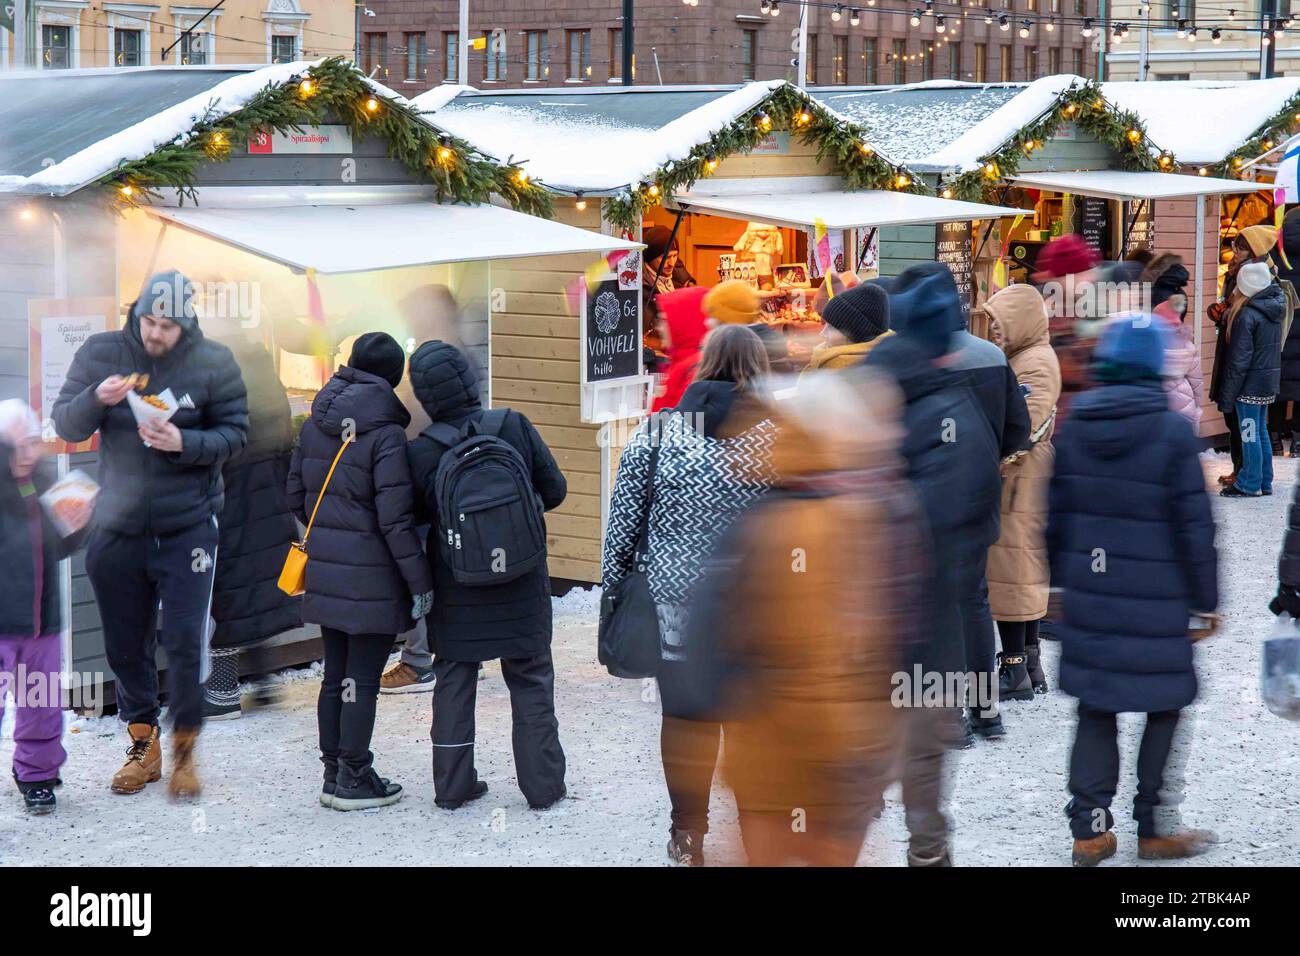 Blurred motions of people at Tuomaan markkinat or Helsinki Christmas Market on Senate Square in Helsinki, Finland Stock Photo